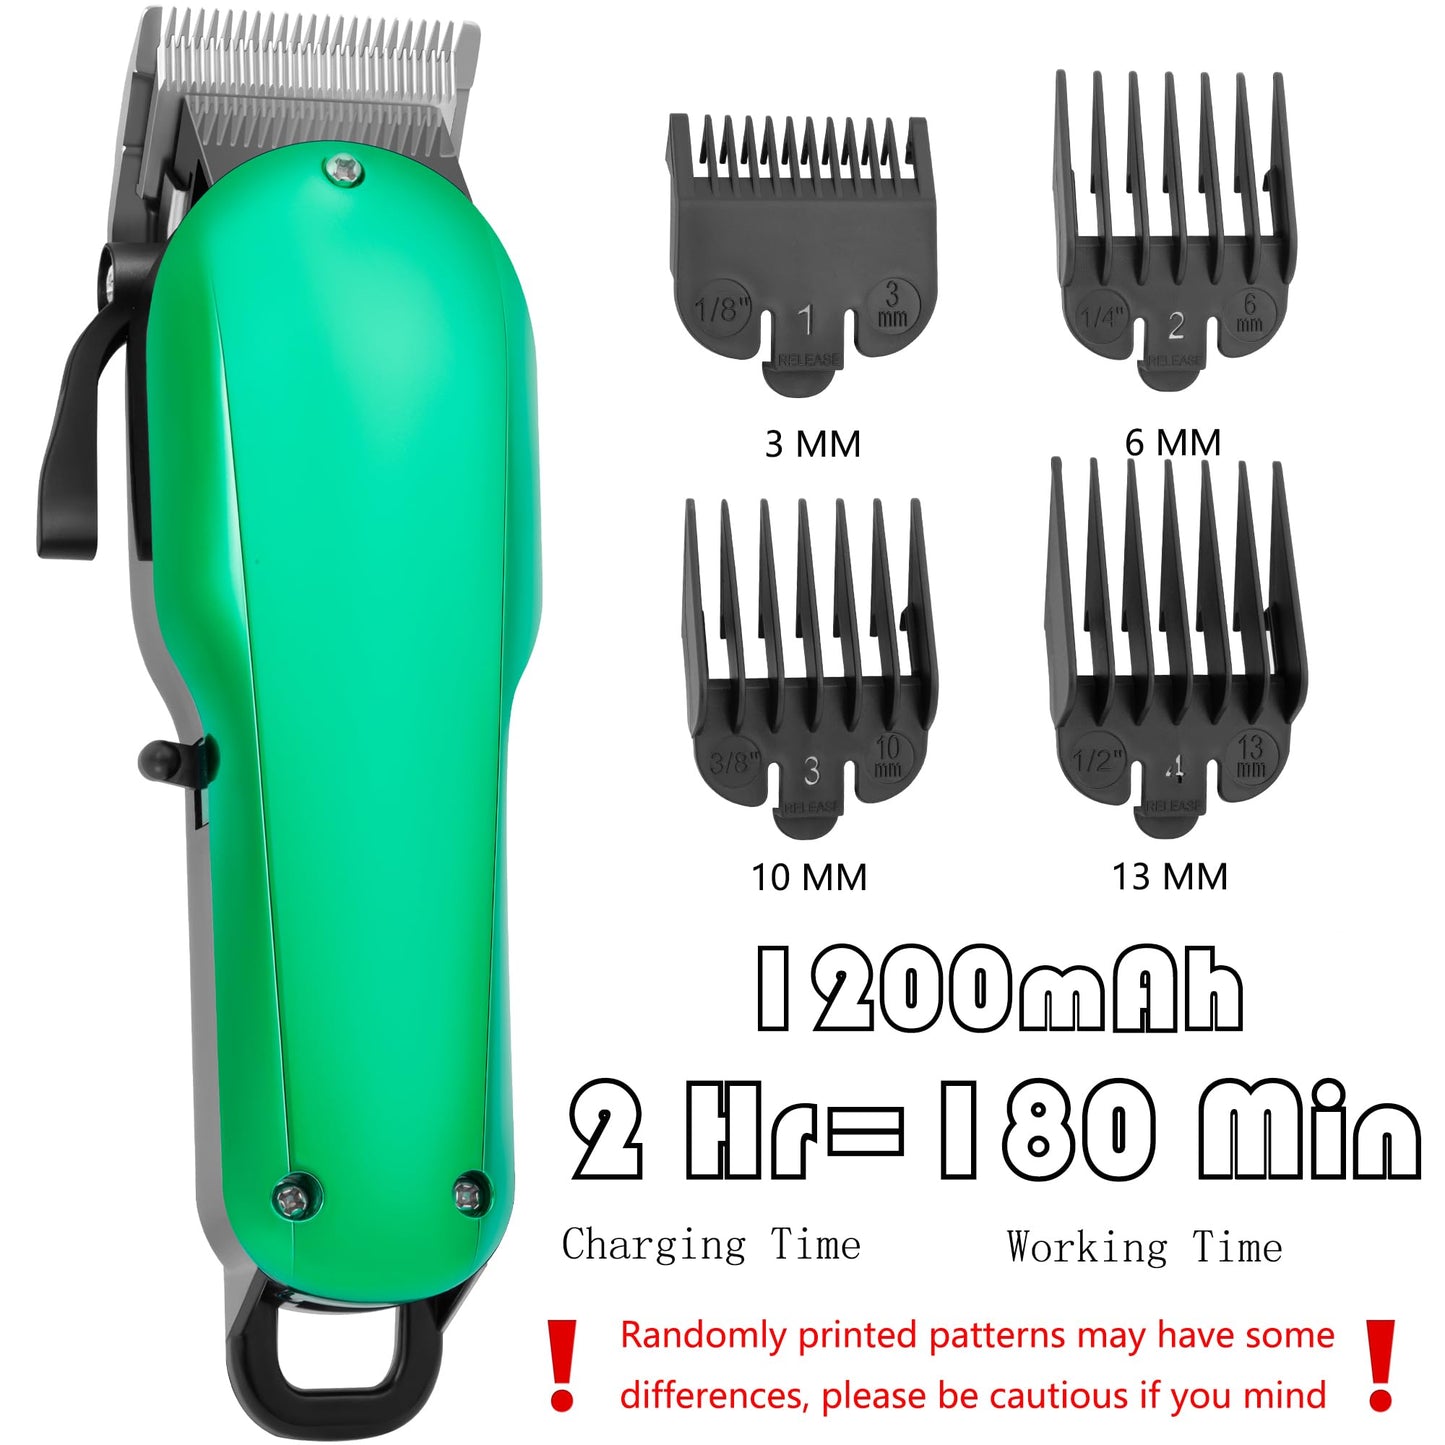 Aoocan Professional Hair Clippers for Men, Cordless&Corded Barber Clippers for Hair Cutting & Grooming, Rechargeable Beard